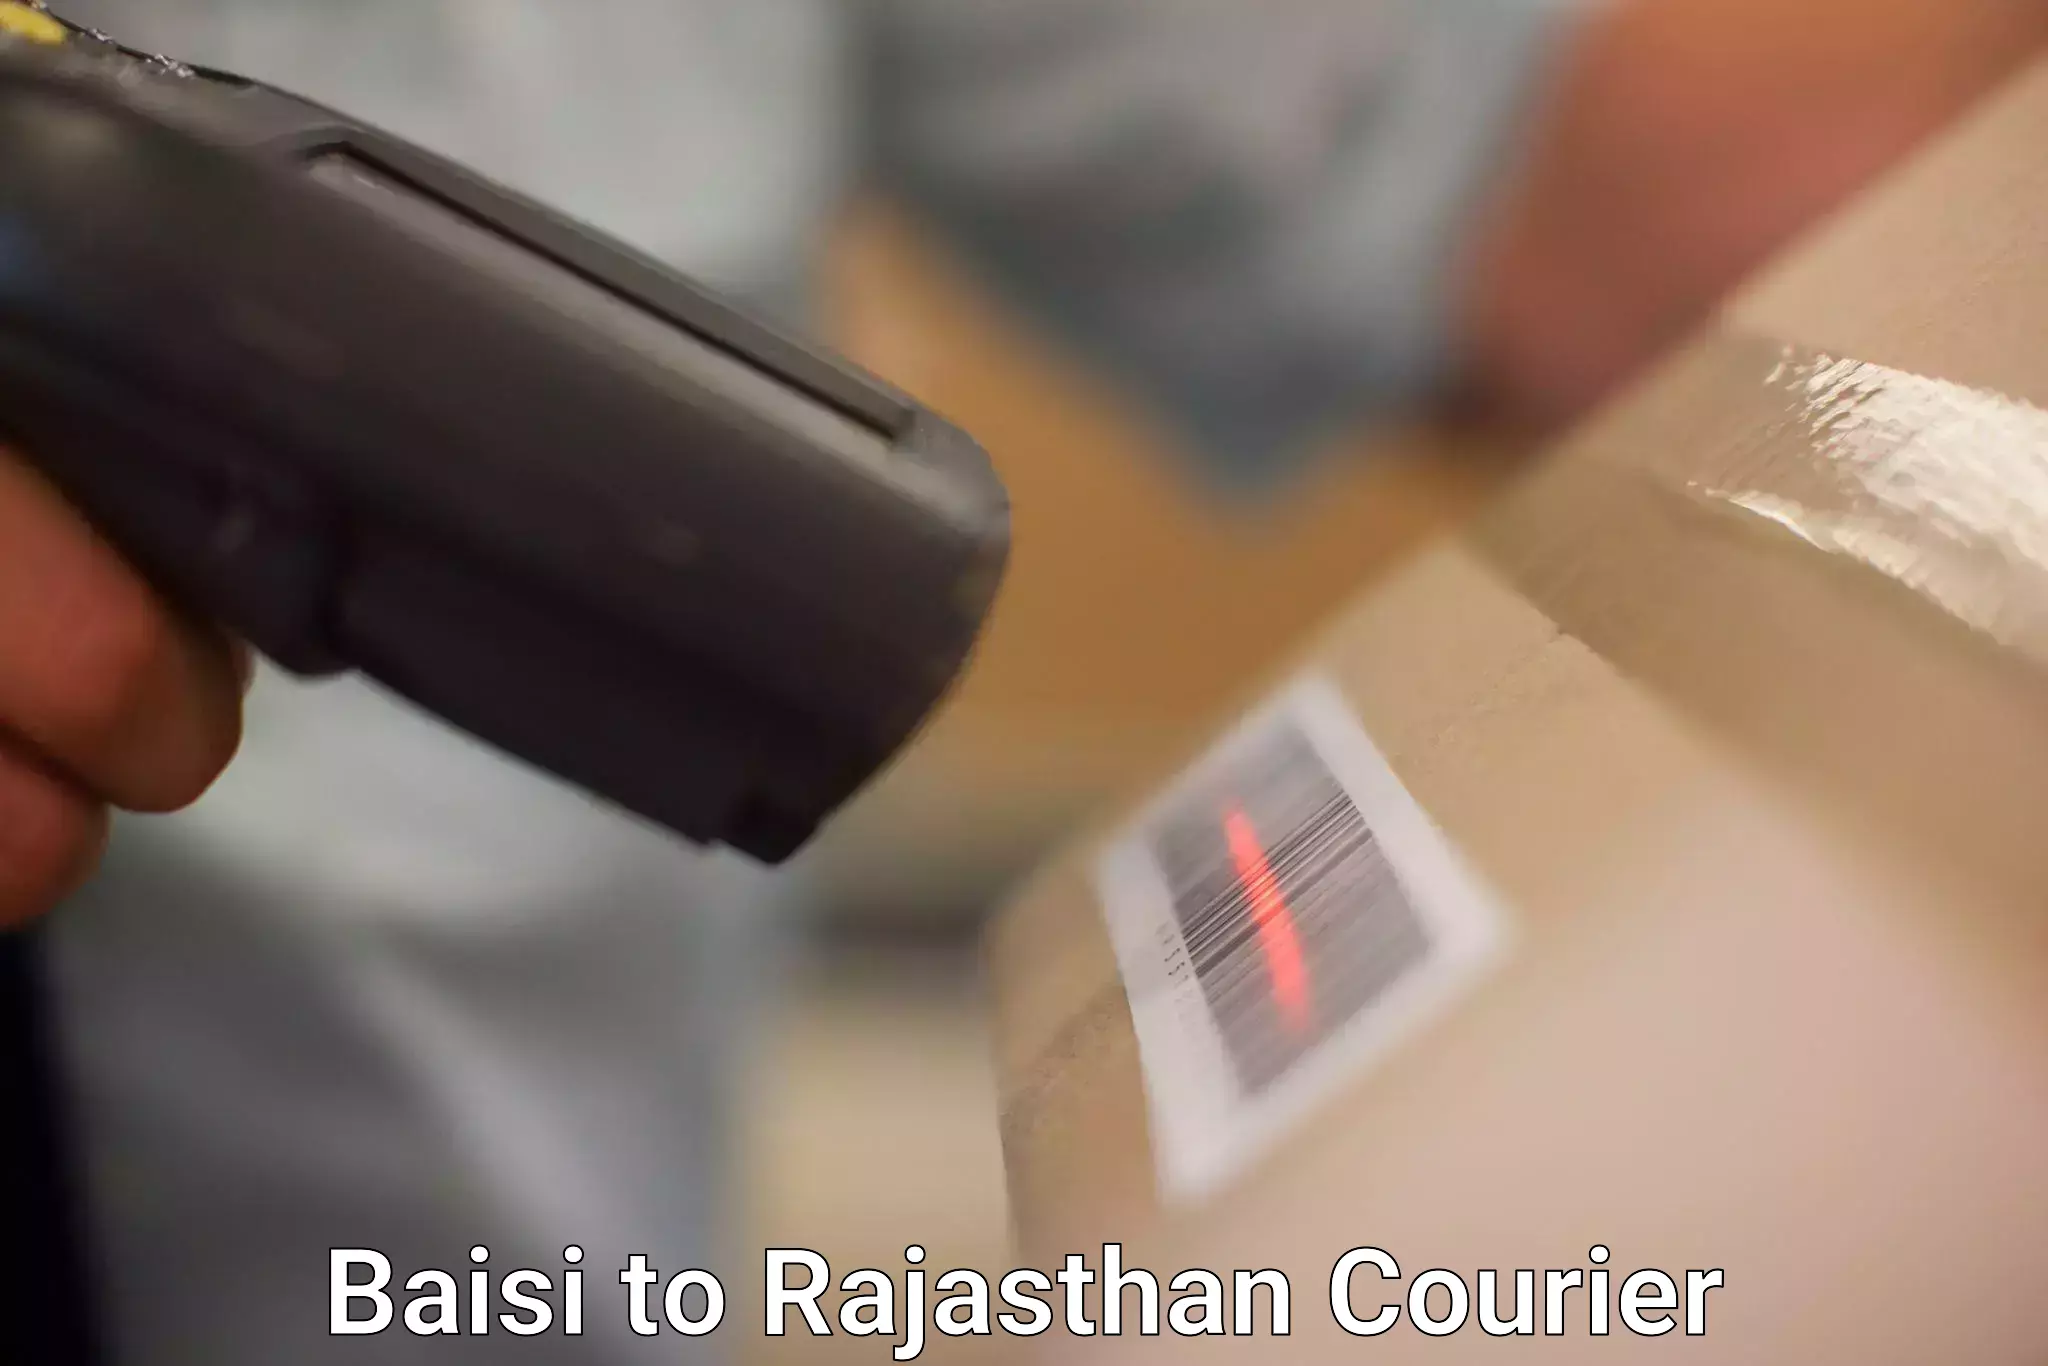 Affordable parcel service Baisi to Rajasthan